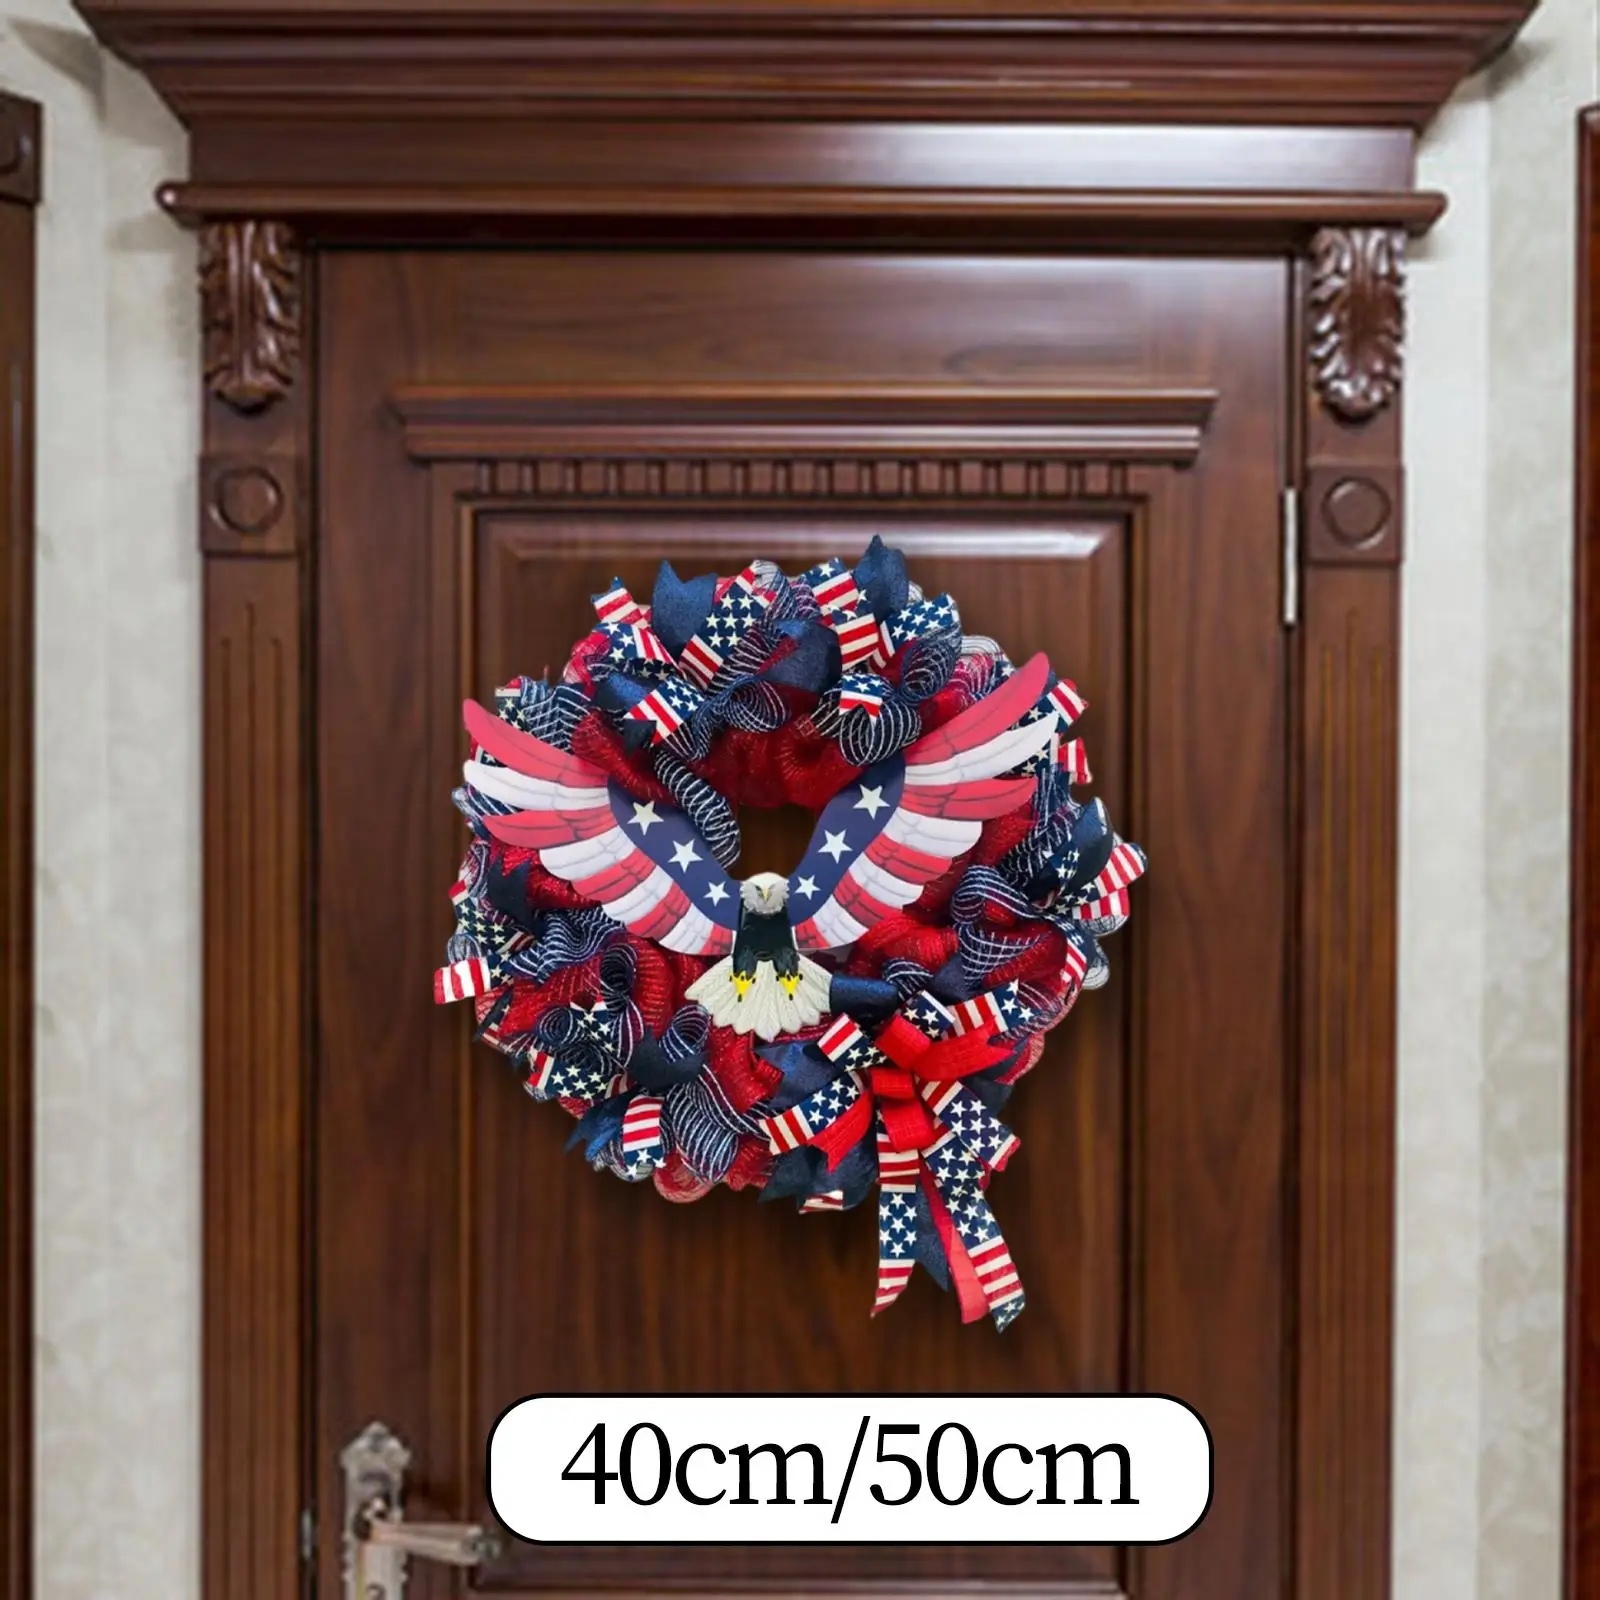 4TH of July Patriotic  Mesh Wreath for Independence Day Fine Craftsmanship Indoor and Outdoor Red White Blue Handcrafted